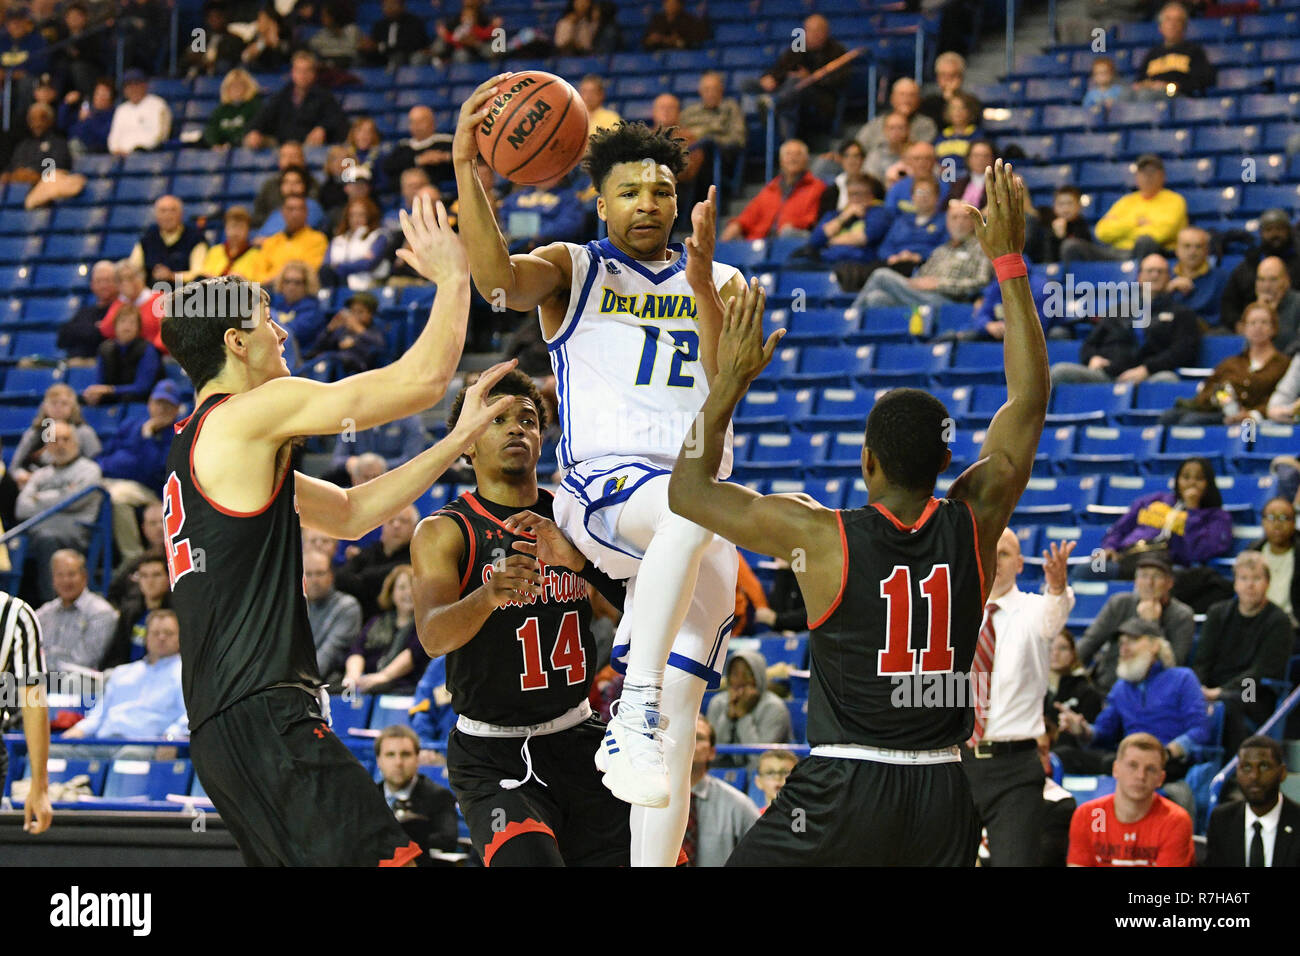 Newark, Delaware, USA. 9th Dec, 2018. DDelaware Fightin Blue Hens guard ITHIEL HORTON (12) goes up between a double team during the basketball game played at the Bob Carpenter Center in Newark, DE. The Blue Hens beat the Red Flash 88-83. Credit: Ken Inness/ZUMA Wire/Alamy Live News Stock Photo